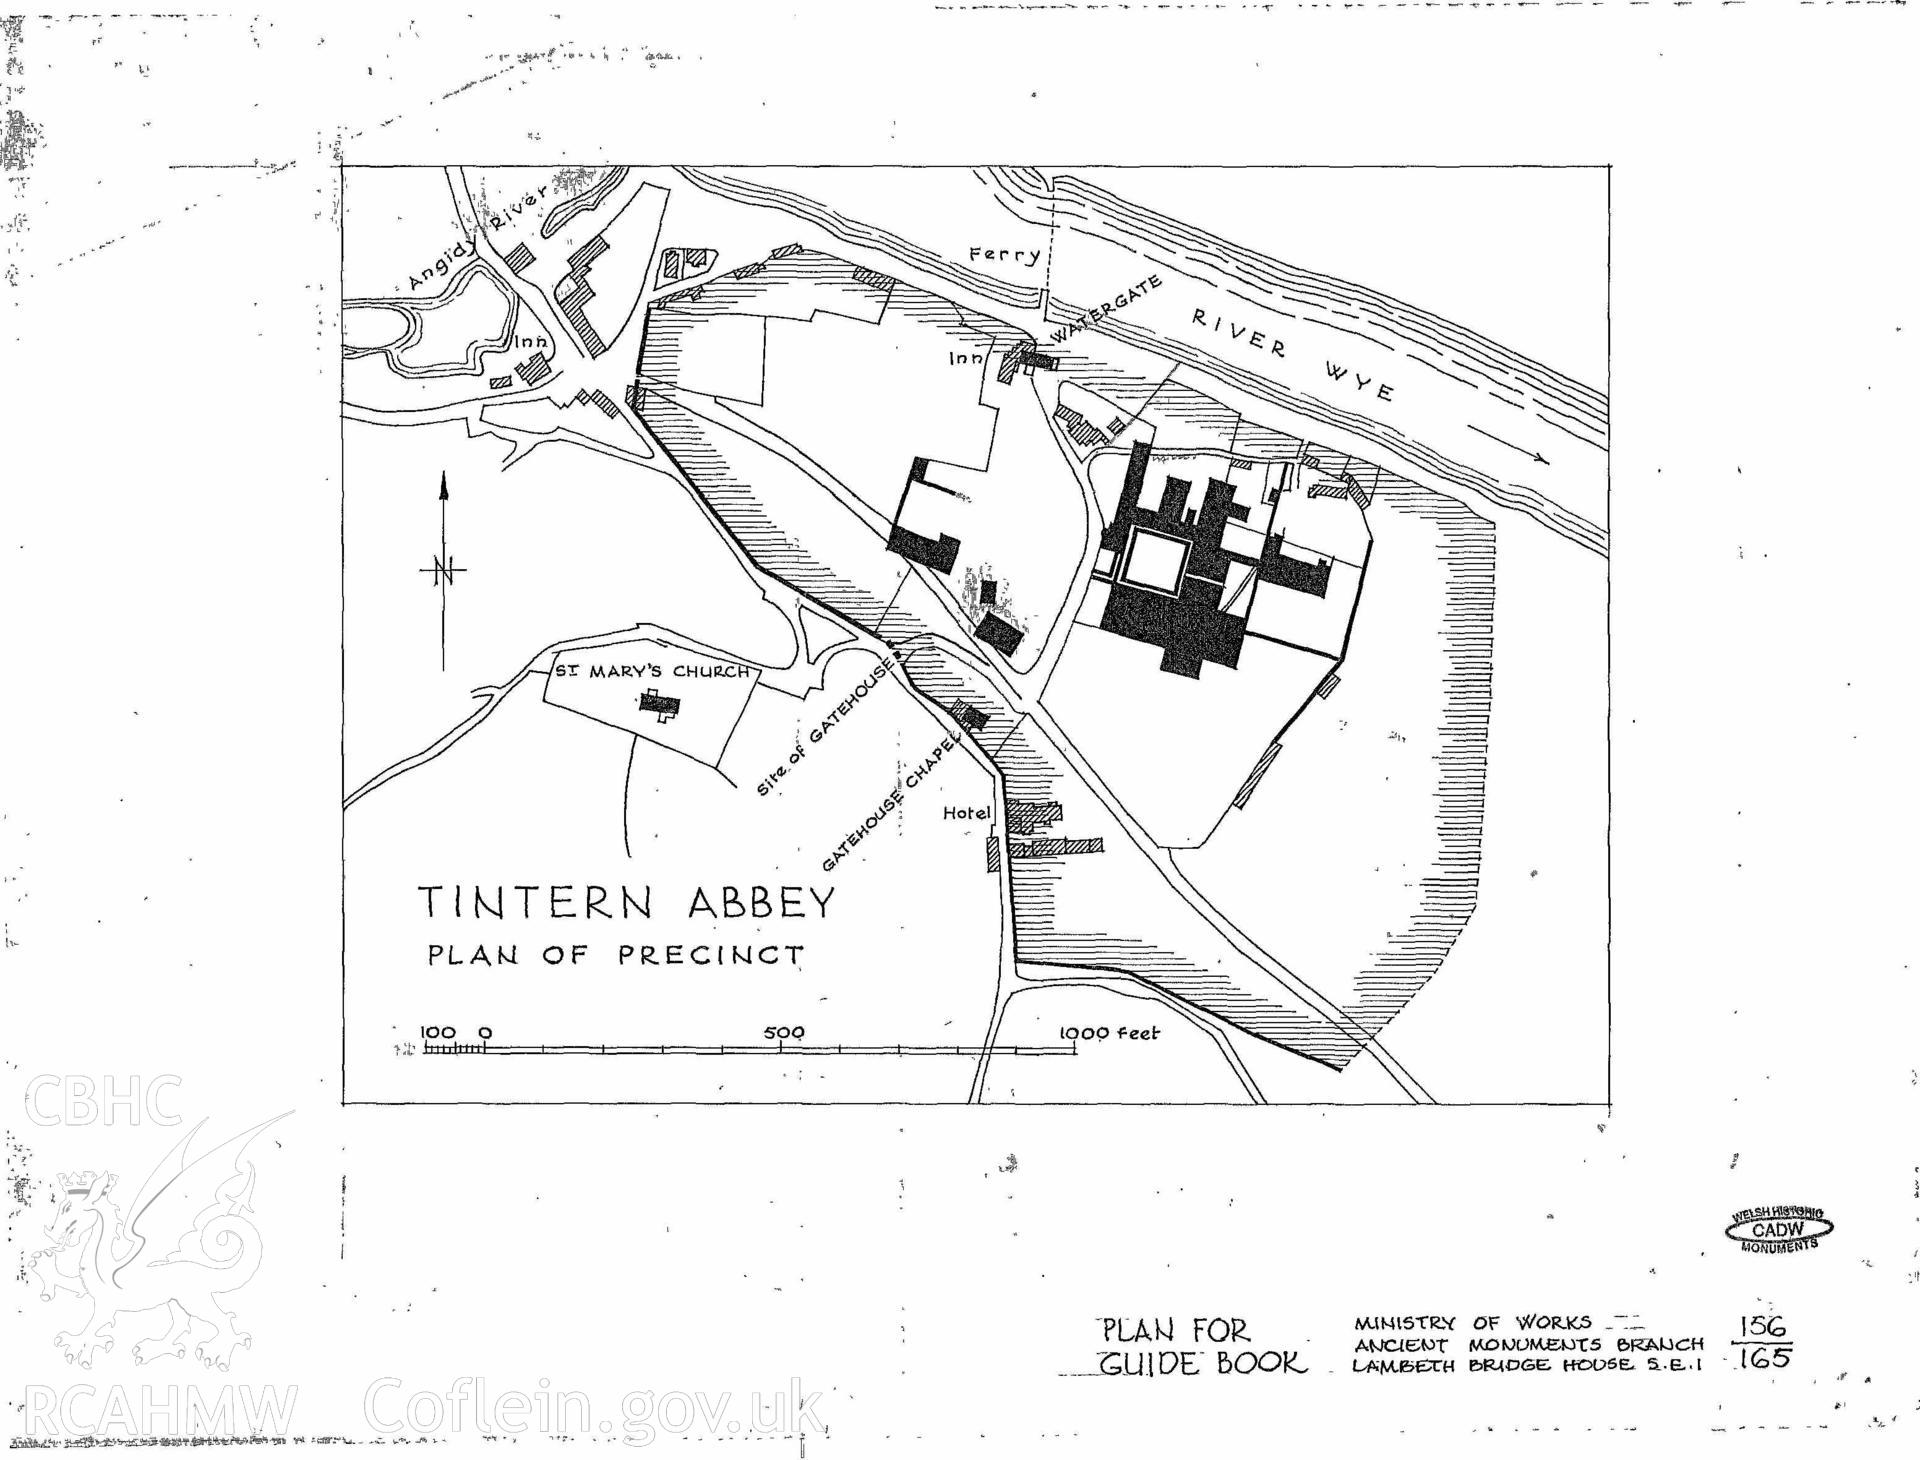 Cadw guardianship monument drawing of Tintern Abbey. Plan of Precinct for Guide Book. Cadw ref. No. 156/165. Scale 1:100.